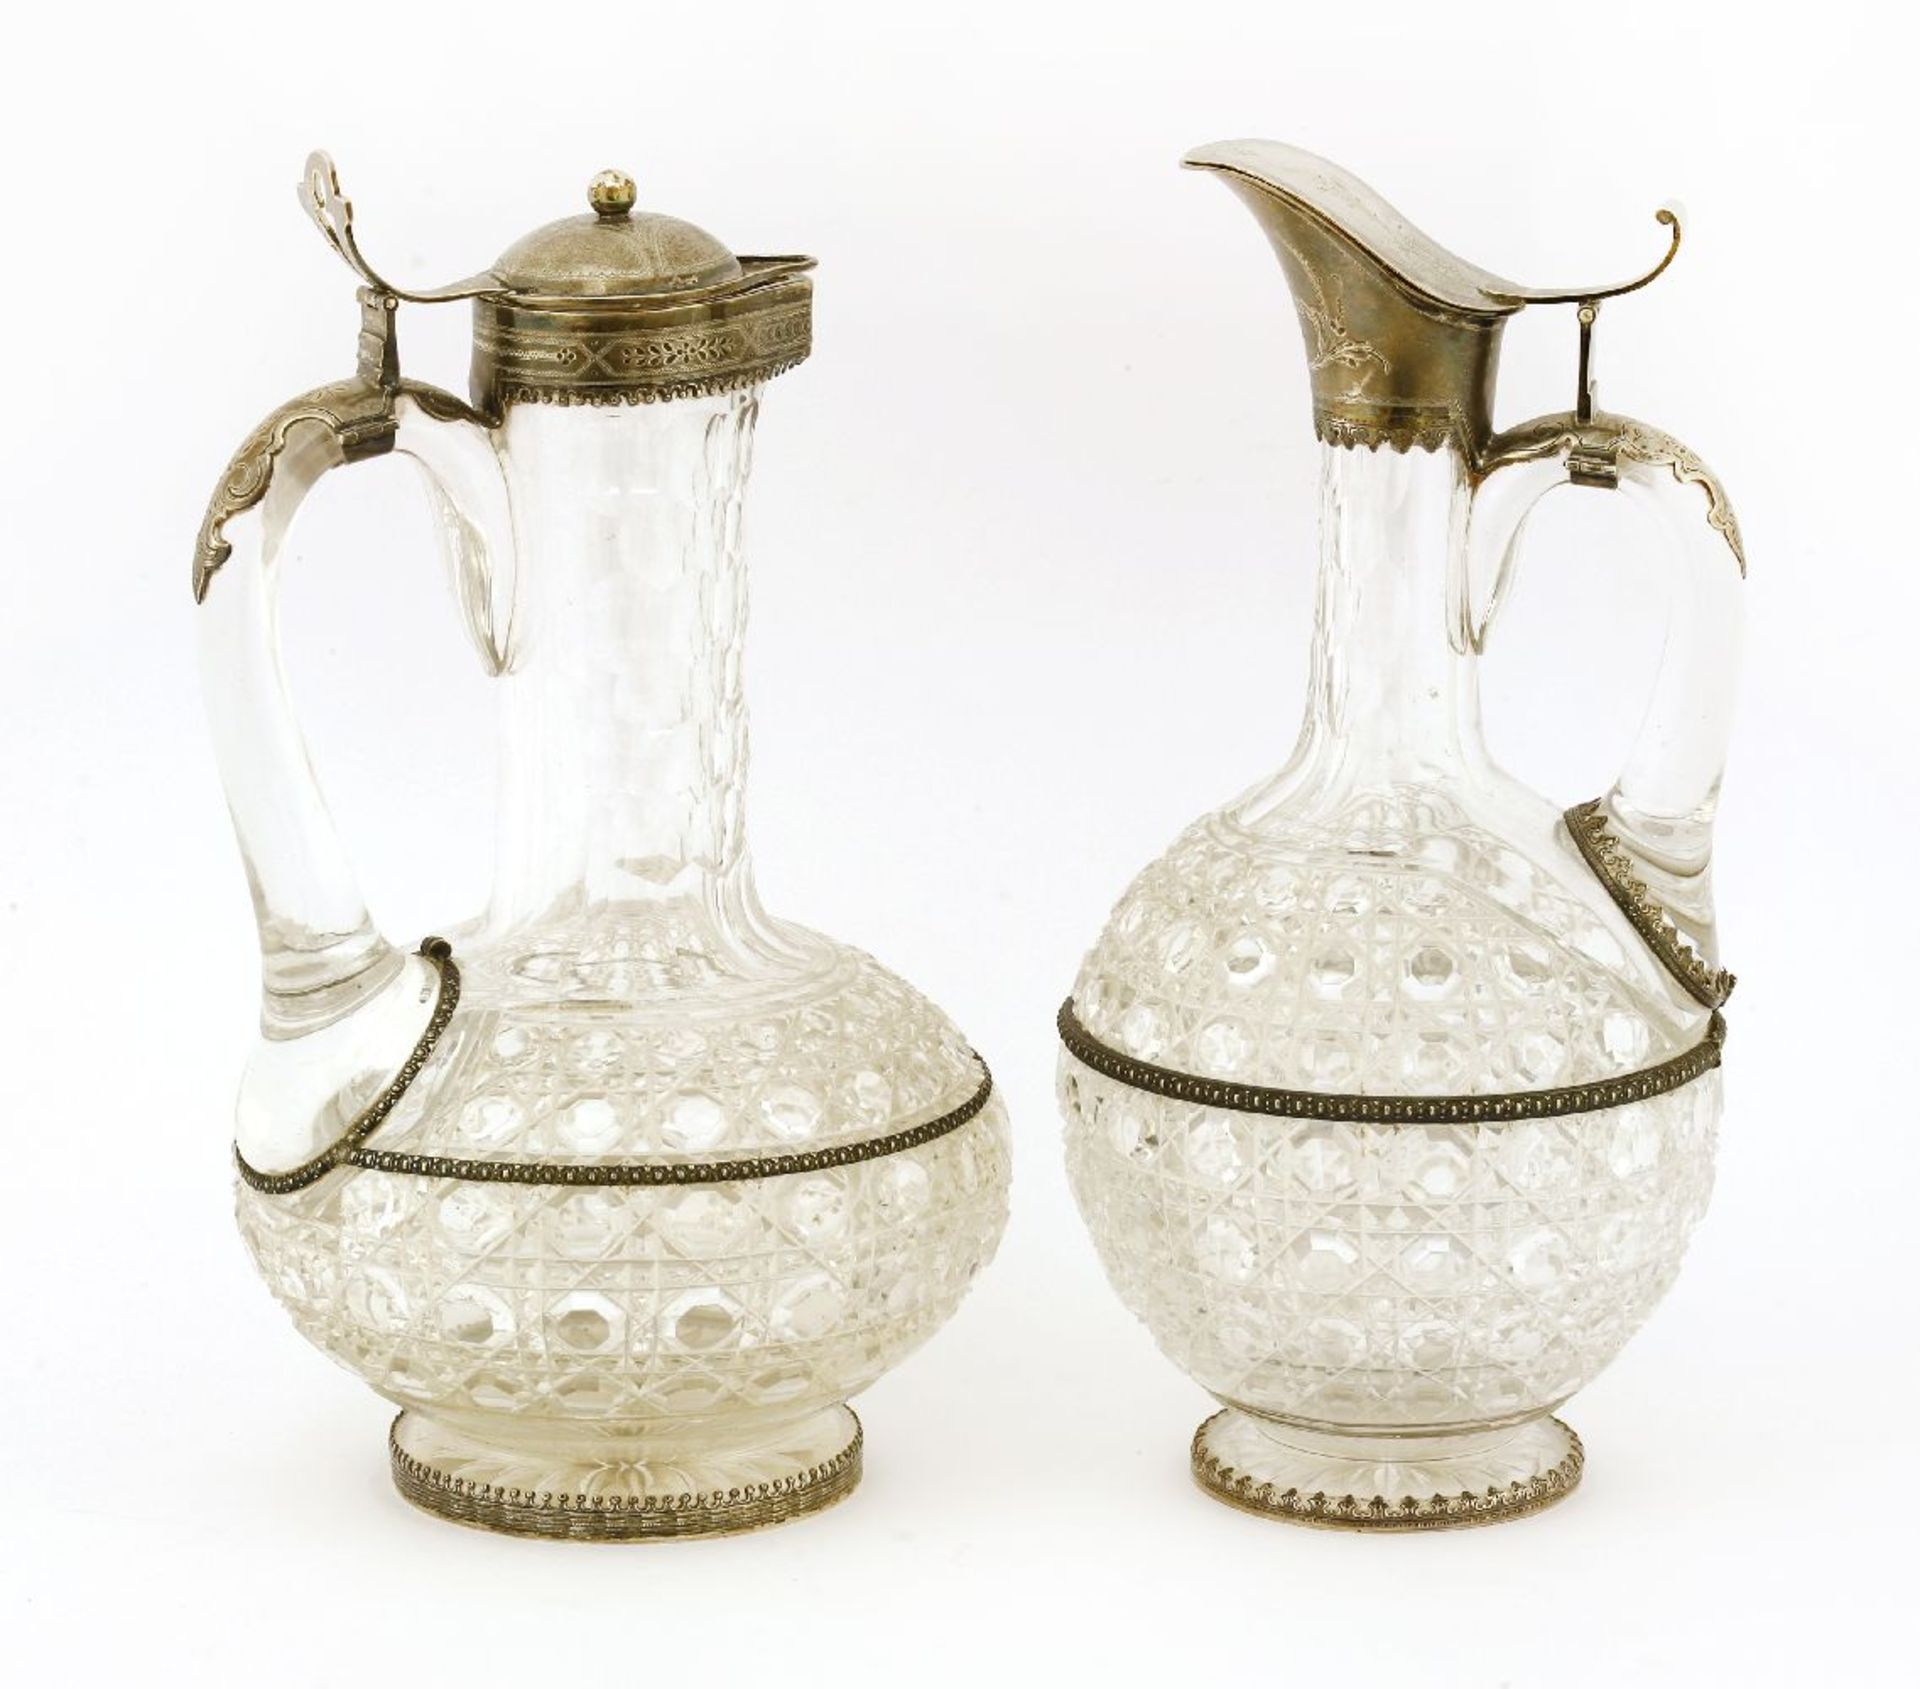 A near pair of mid-19th century German jug glass and silver-mounted claret jugs, the cut bodies of